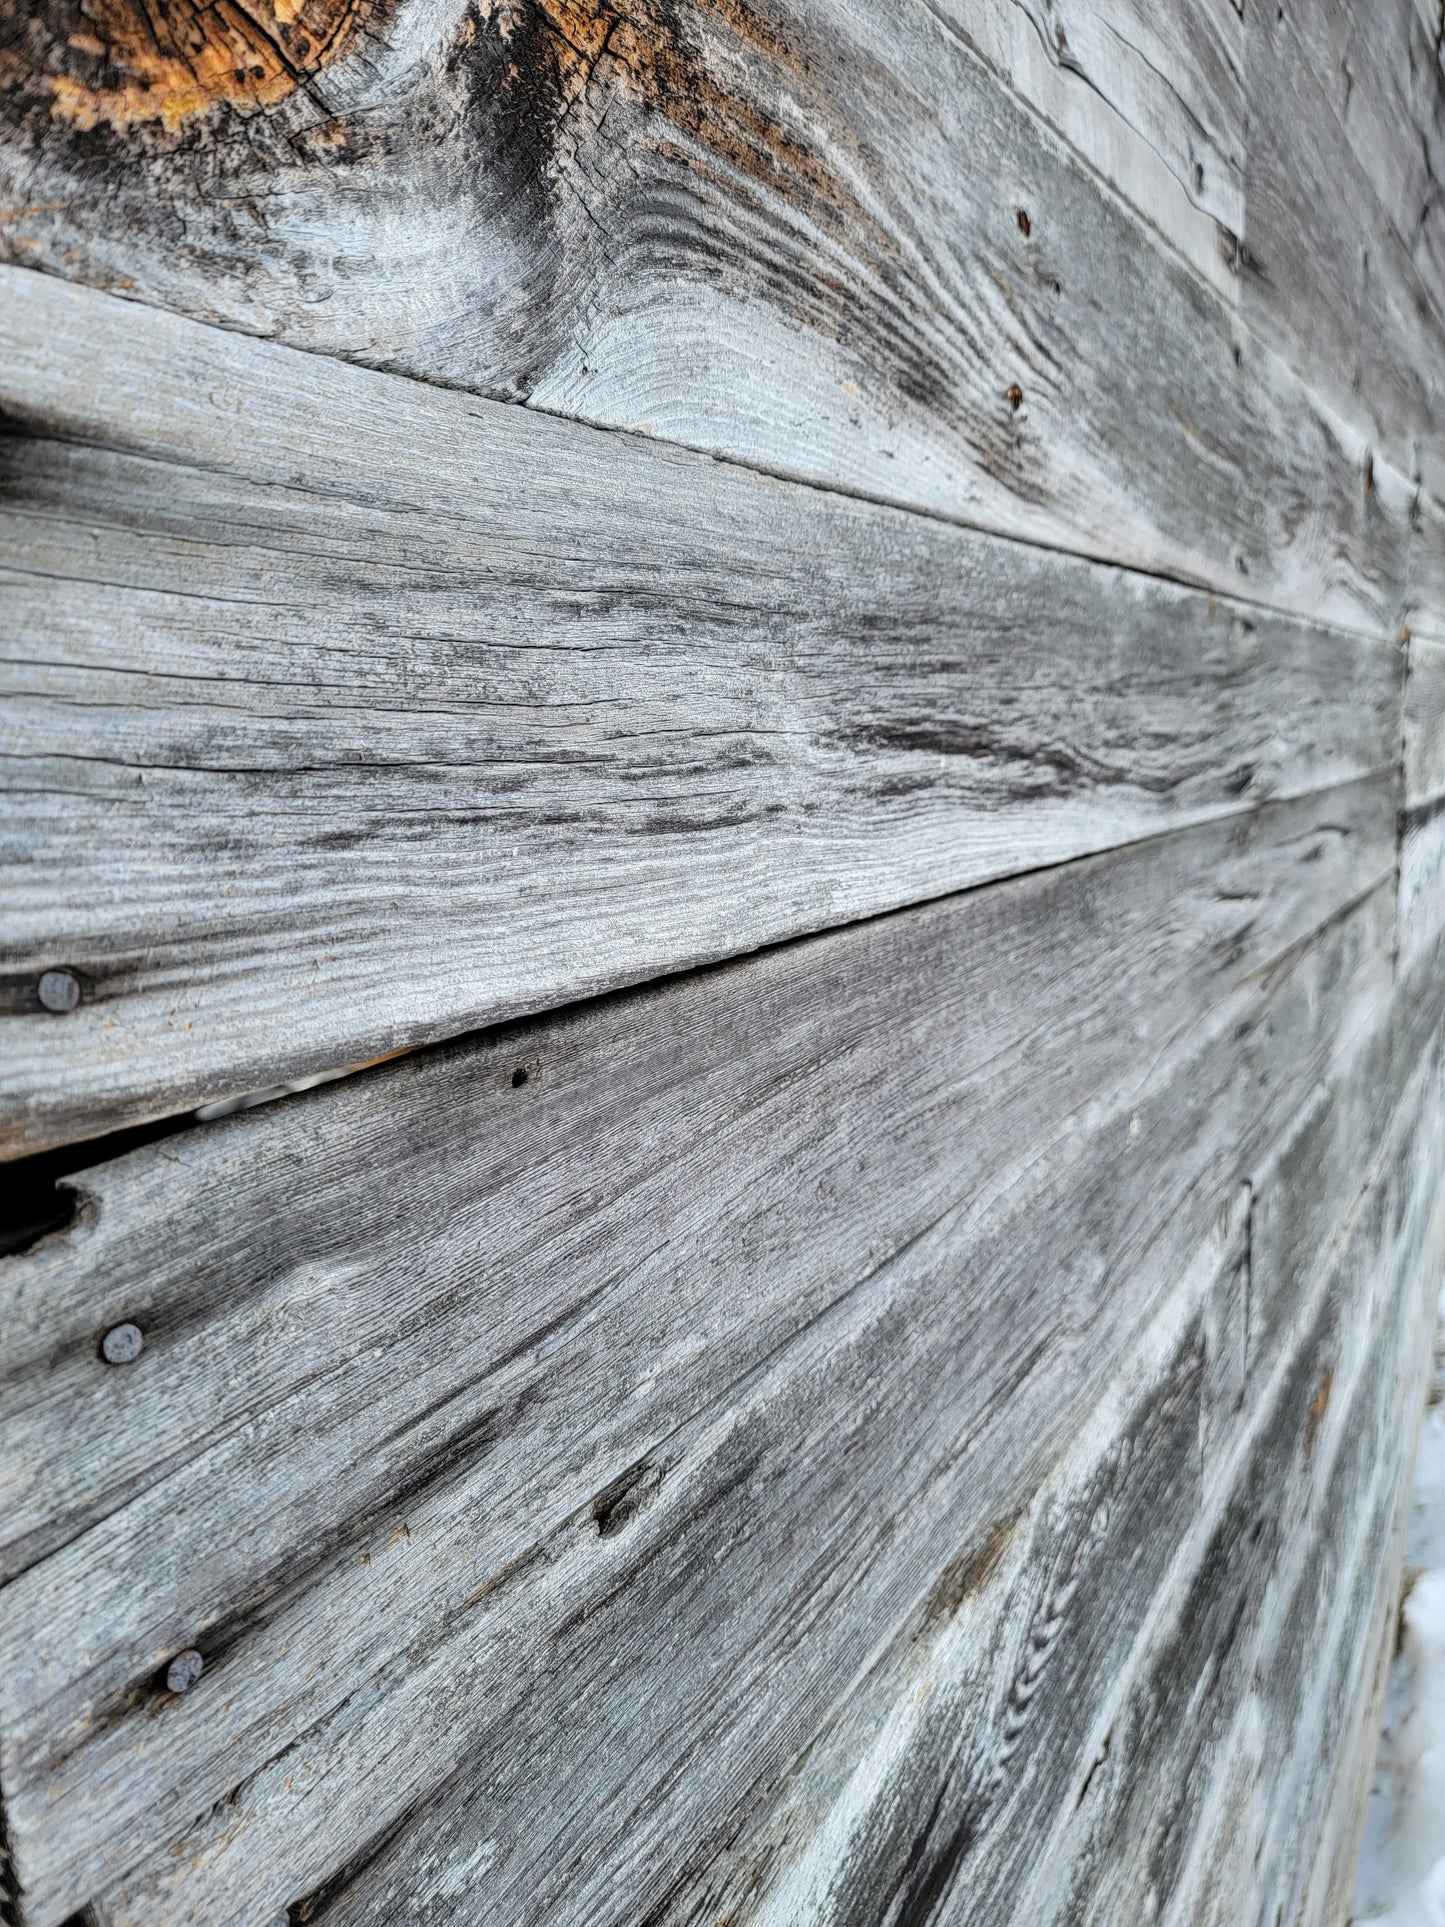 Authentic barn boards